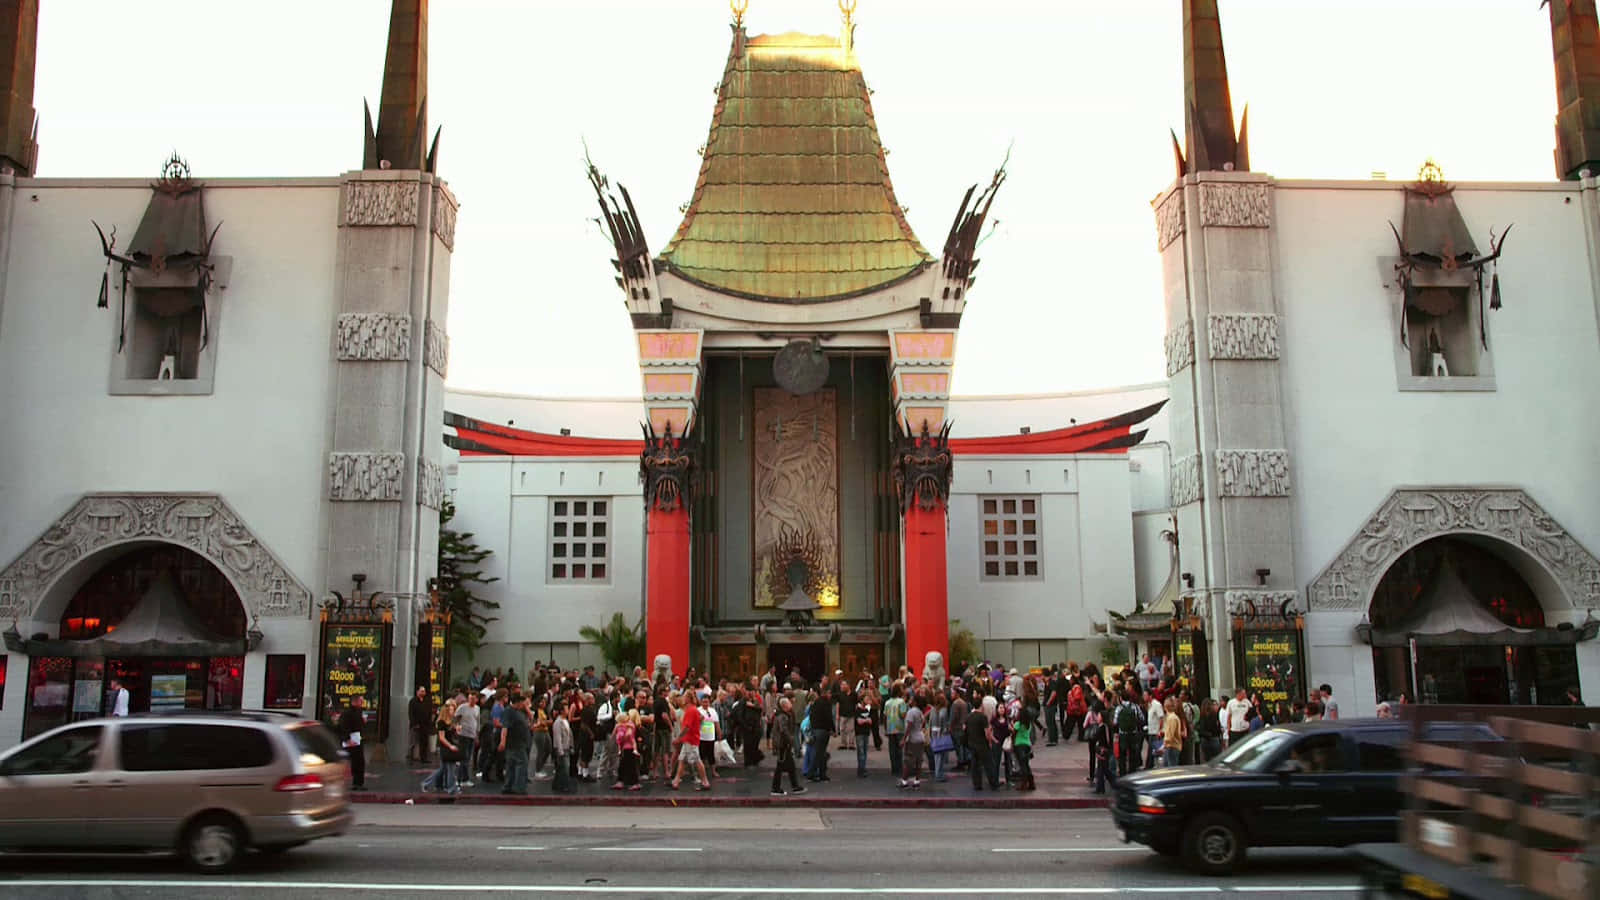 Crowds Outside Graumans Chinese Theatre Wallpaper